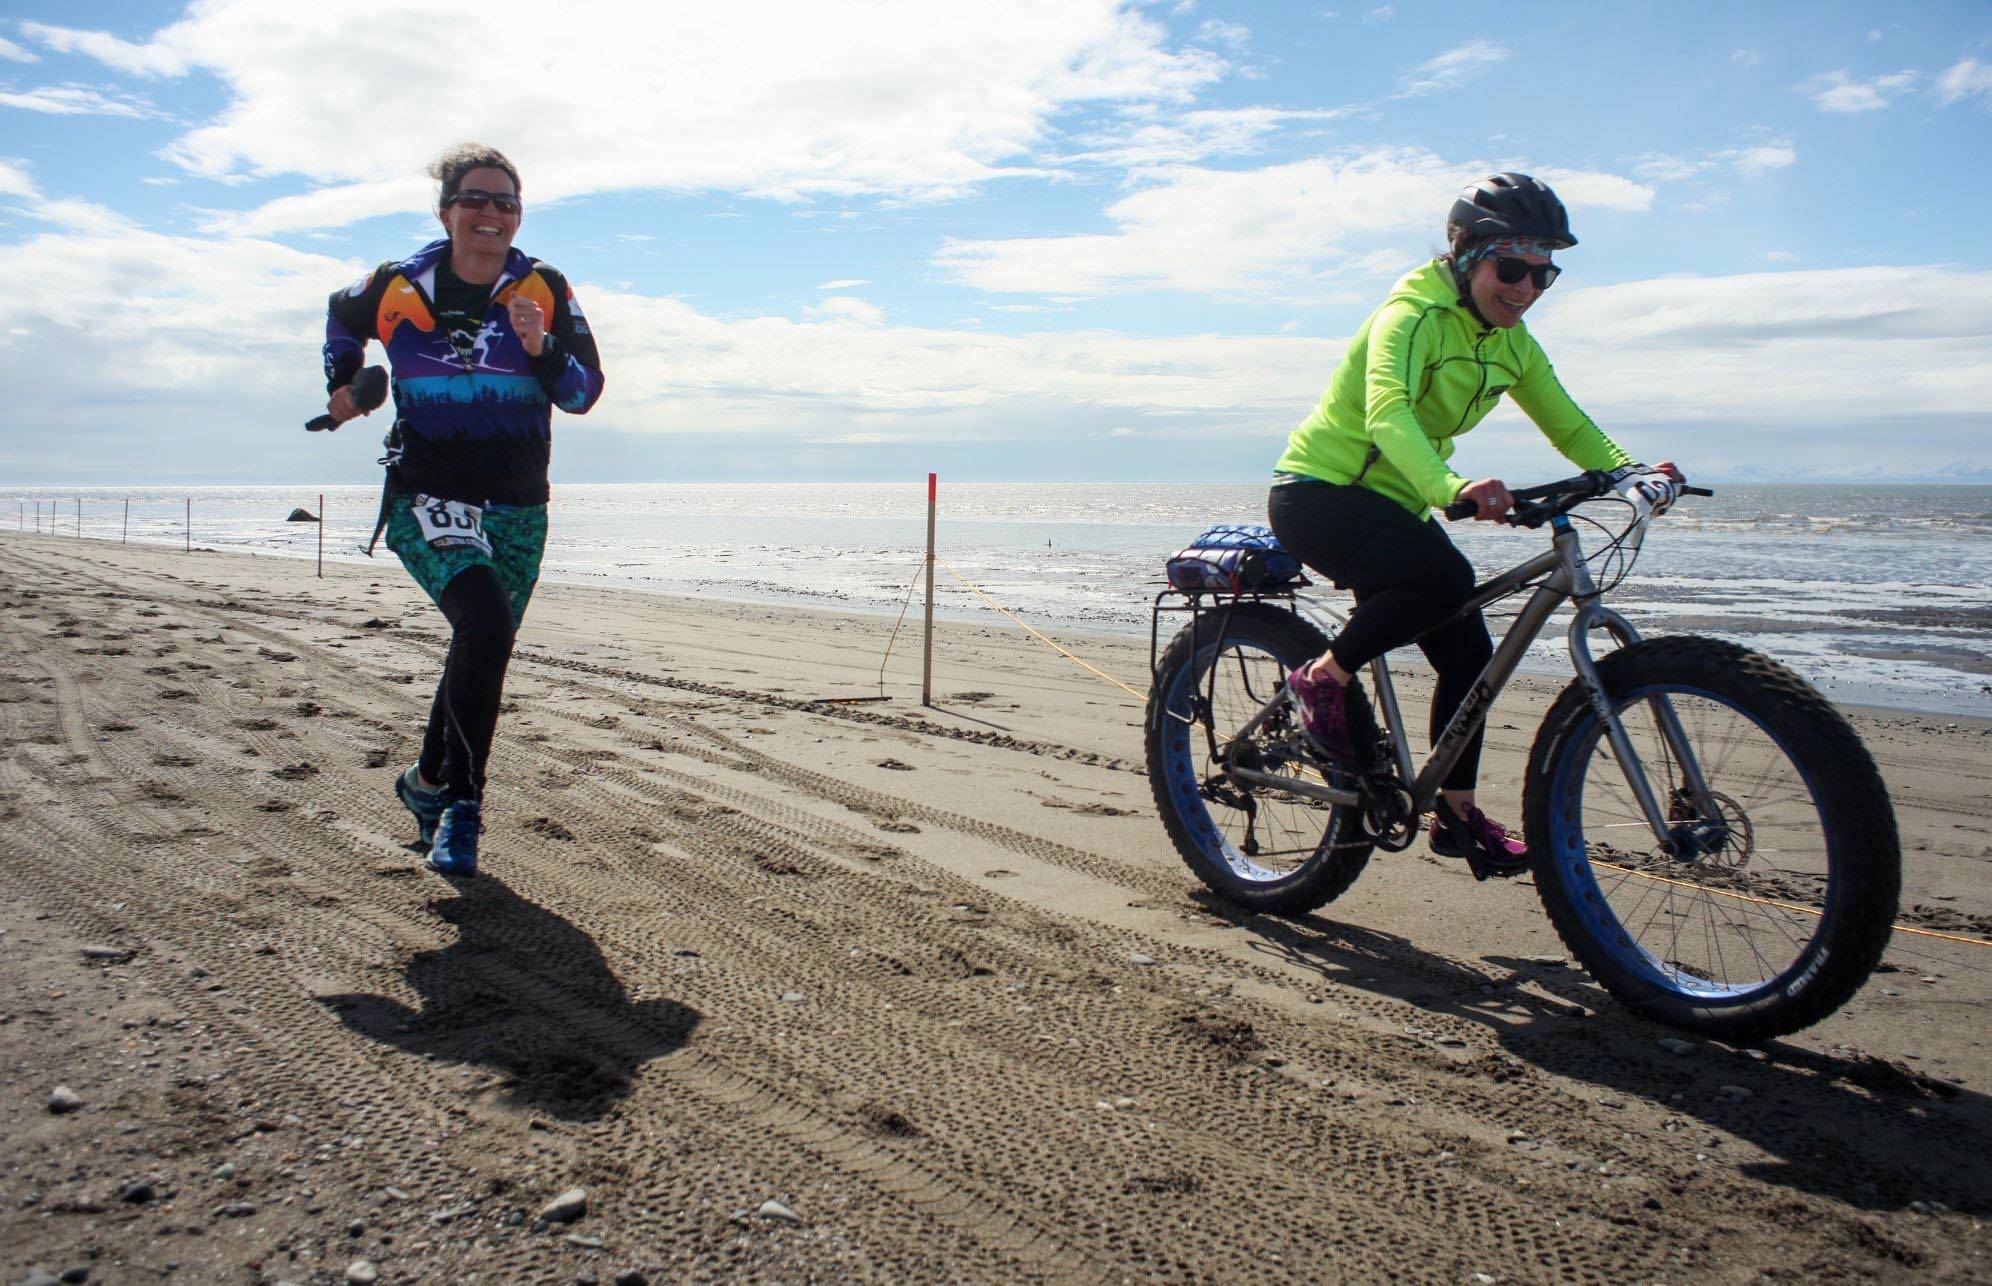 Heather Renner and Tasha Reynolds run and fat bike to the finish during 2019 Mouth to Mouth Wild Run & Ride. (Courtesy photo)